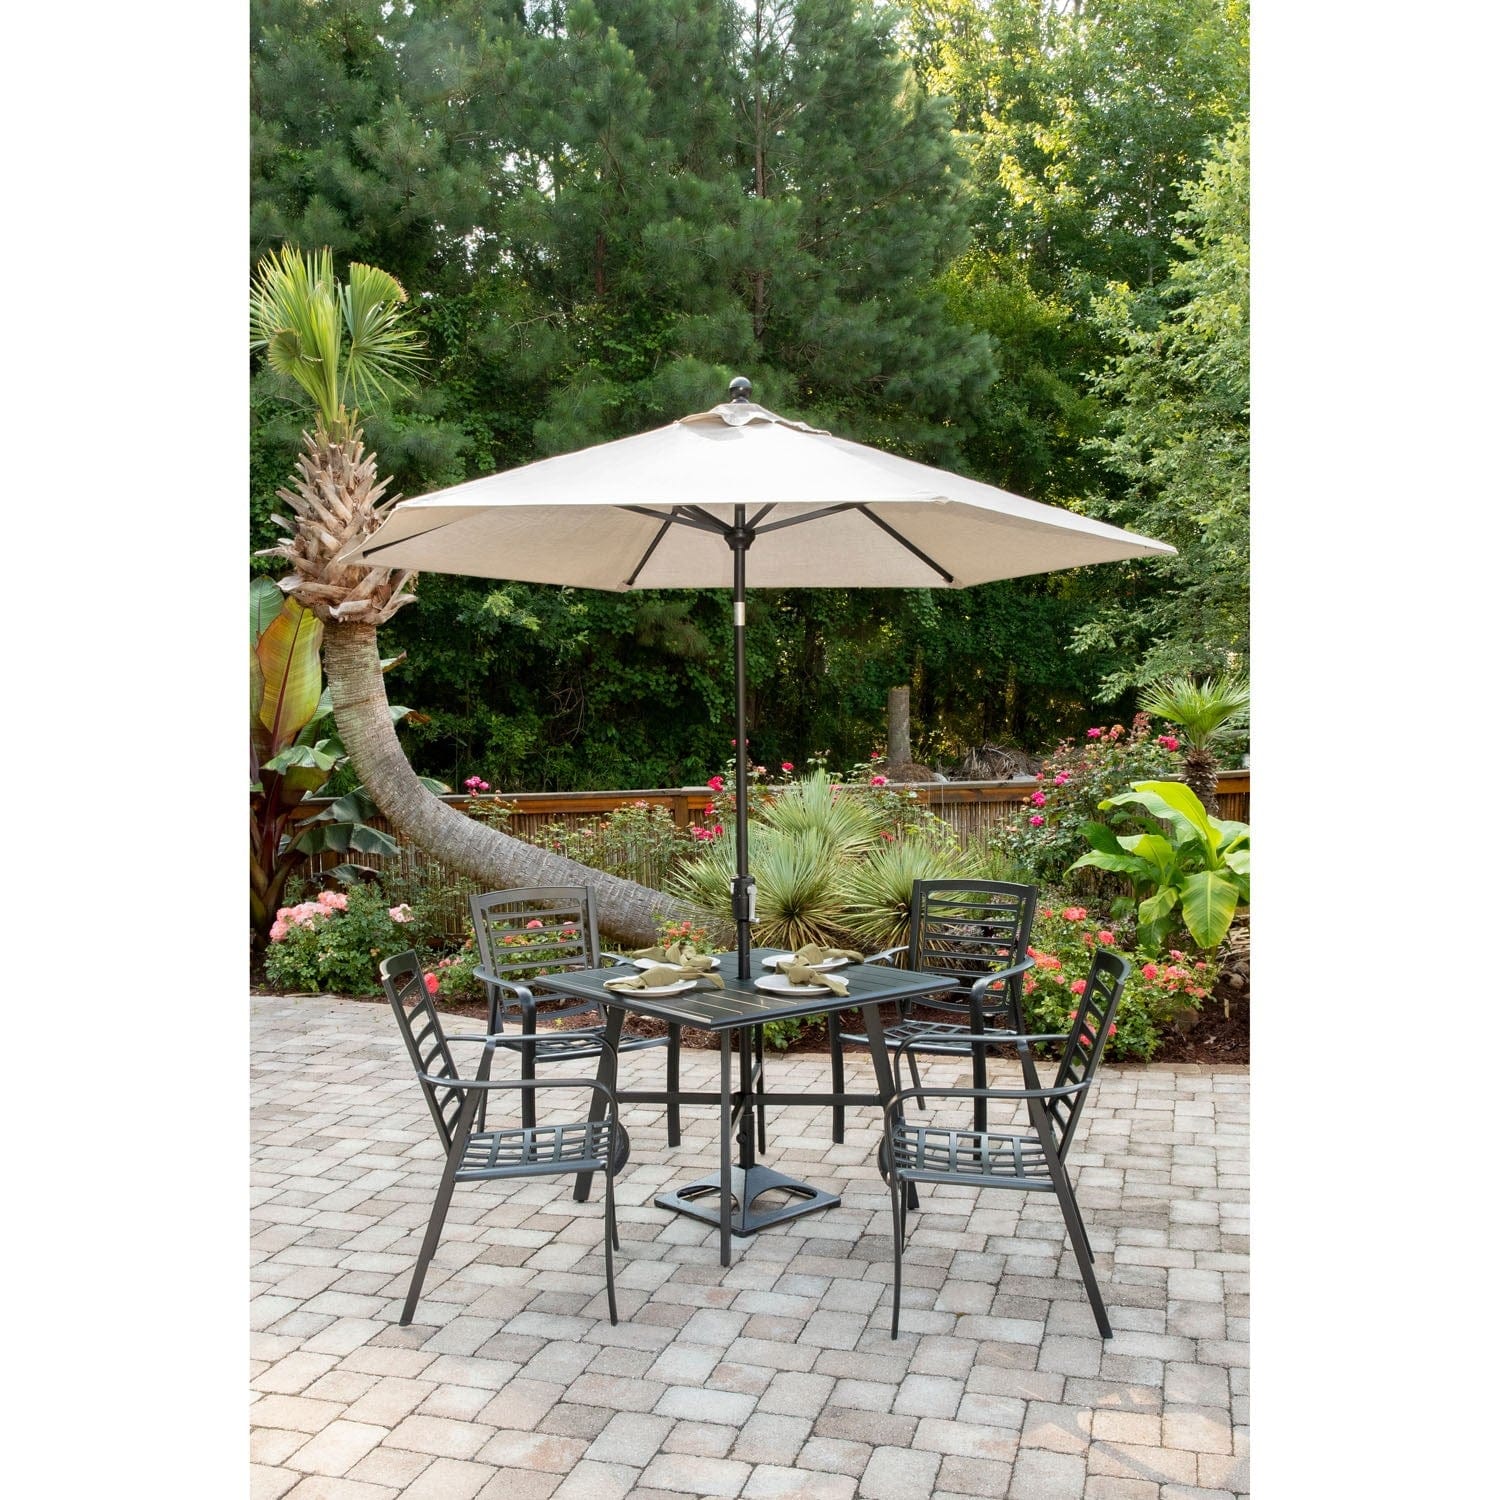 Hanover Outdoor Dining Set Hanover - Pemberton 5pc: 4 Alum Dining Chairs  and 1 38" Sq Slat Table